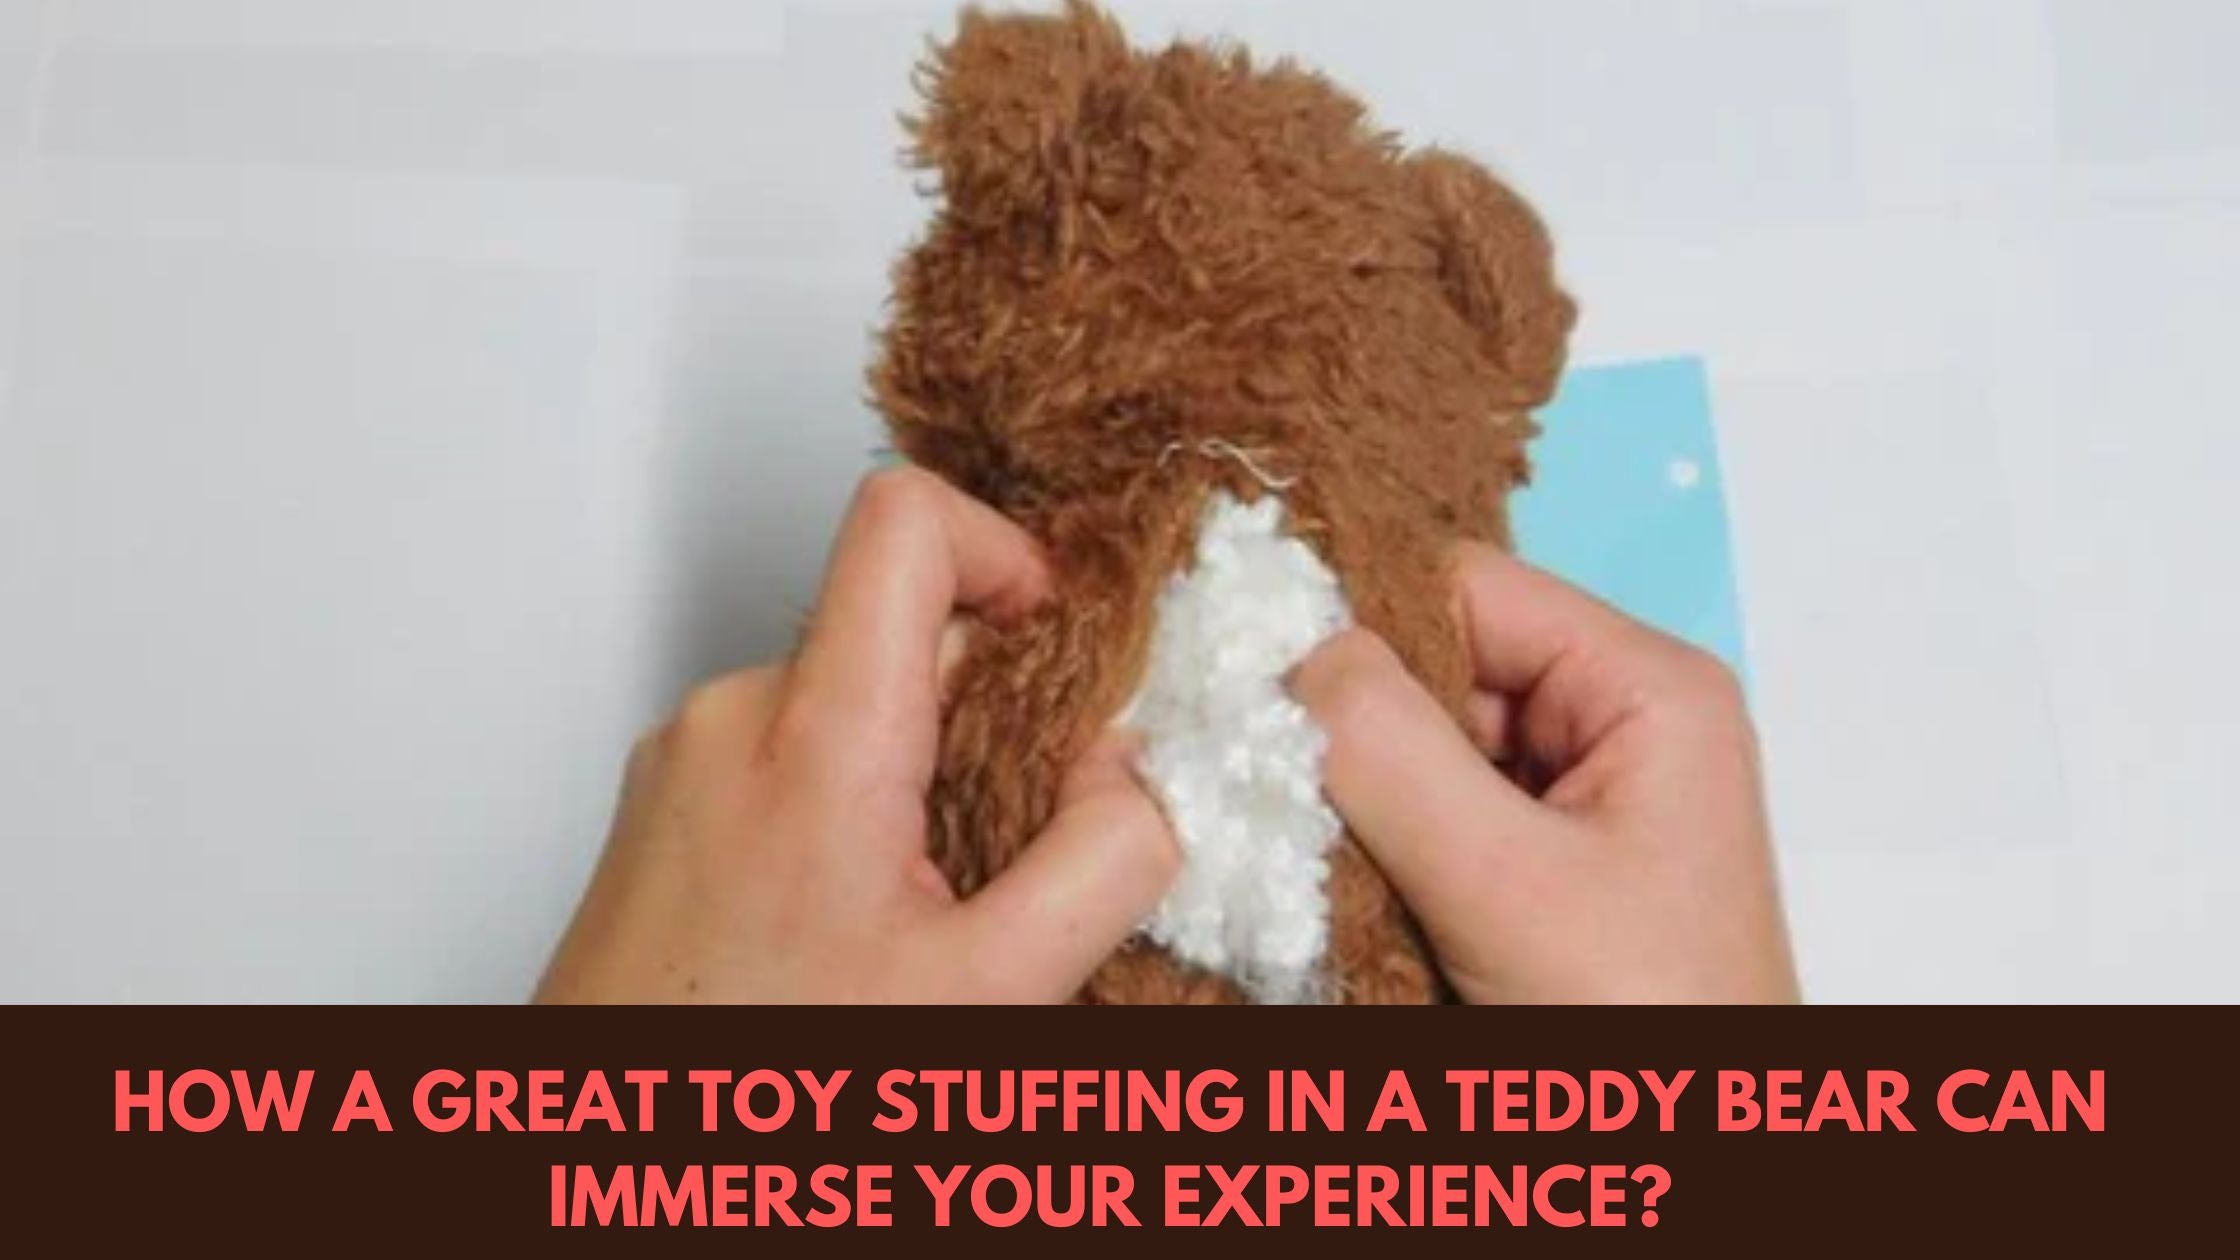 Toy Stuffing